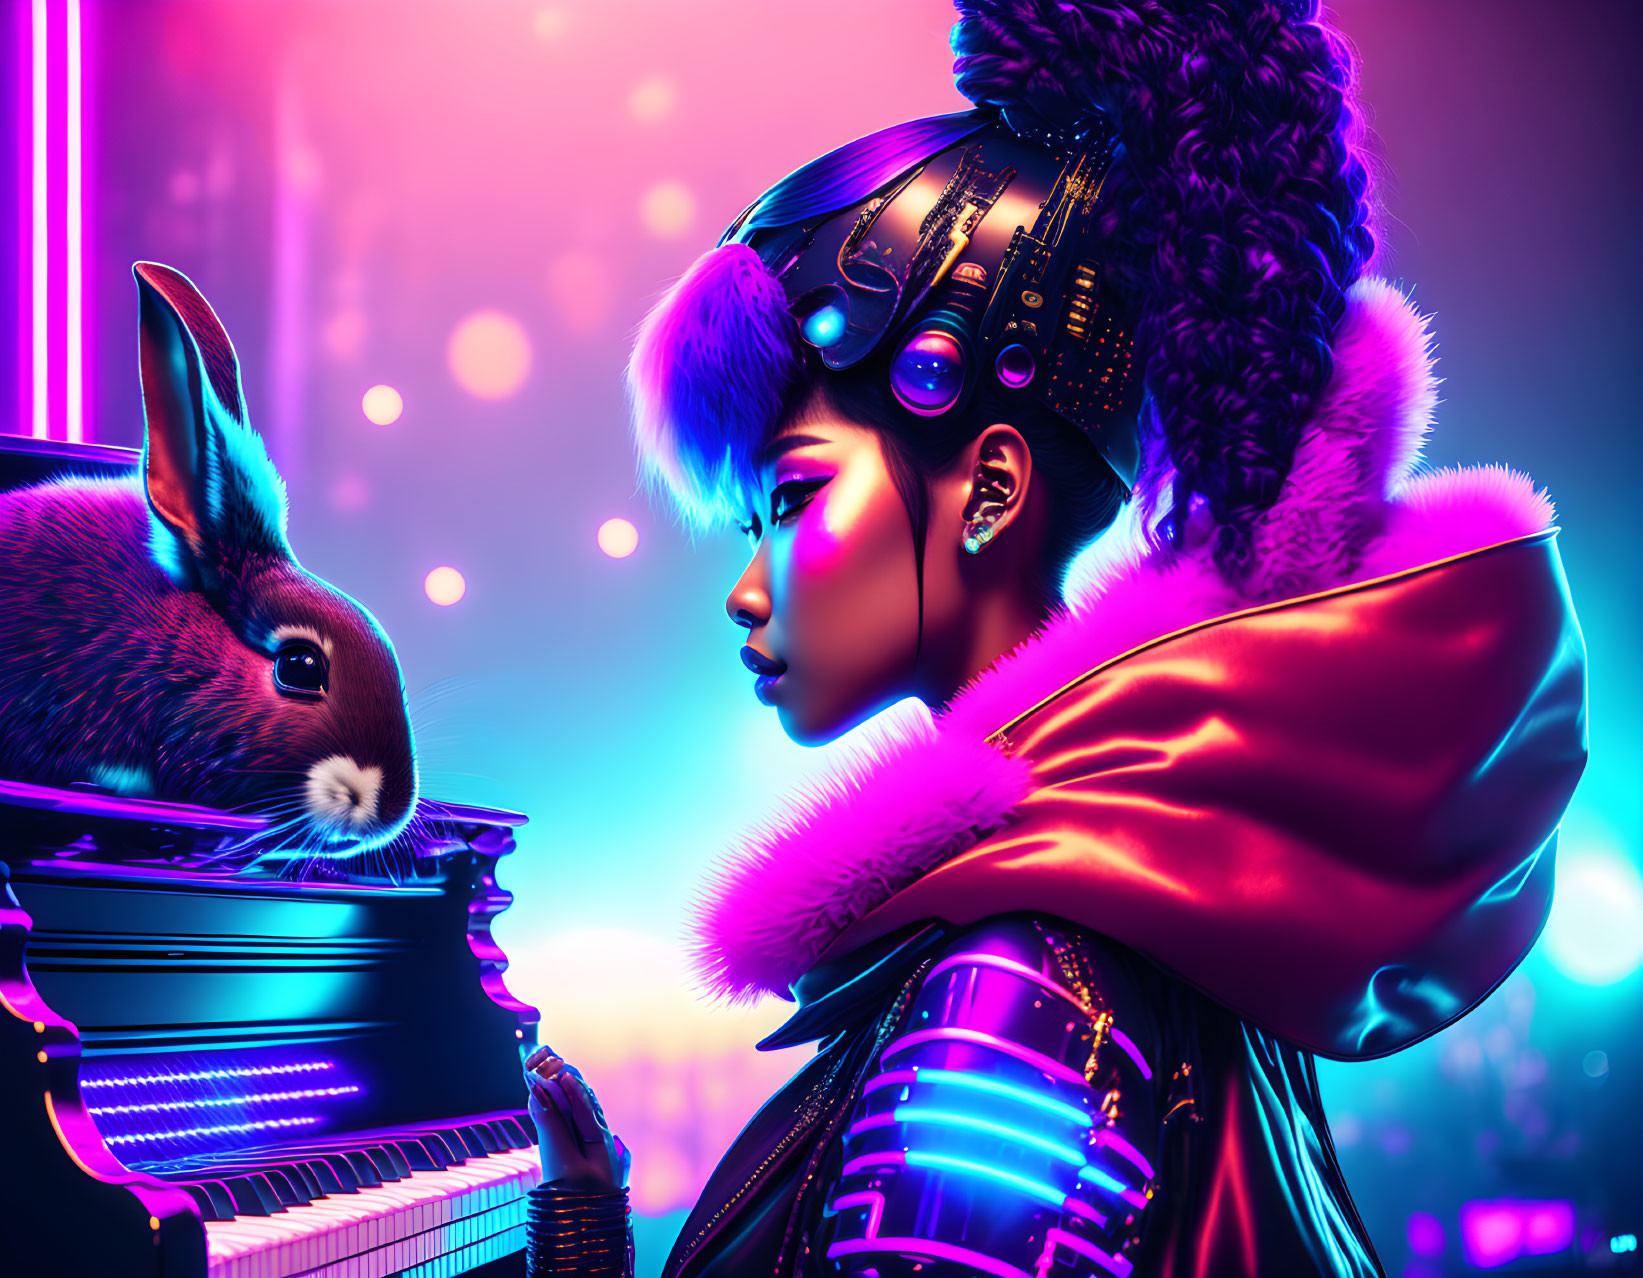 Futuristic woman with elaborate headgear and neon lighting gazing at a bunny in cyberpunk setting